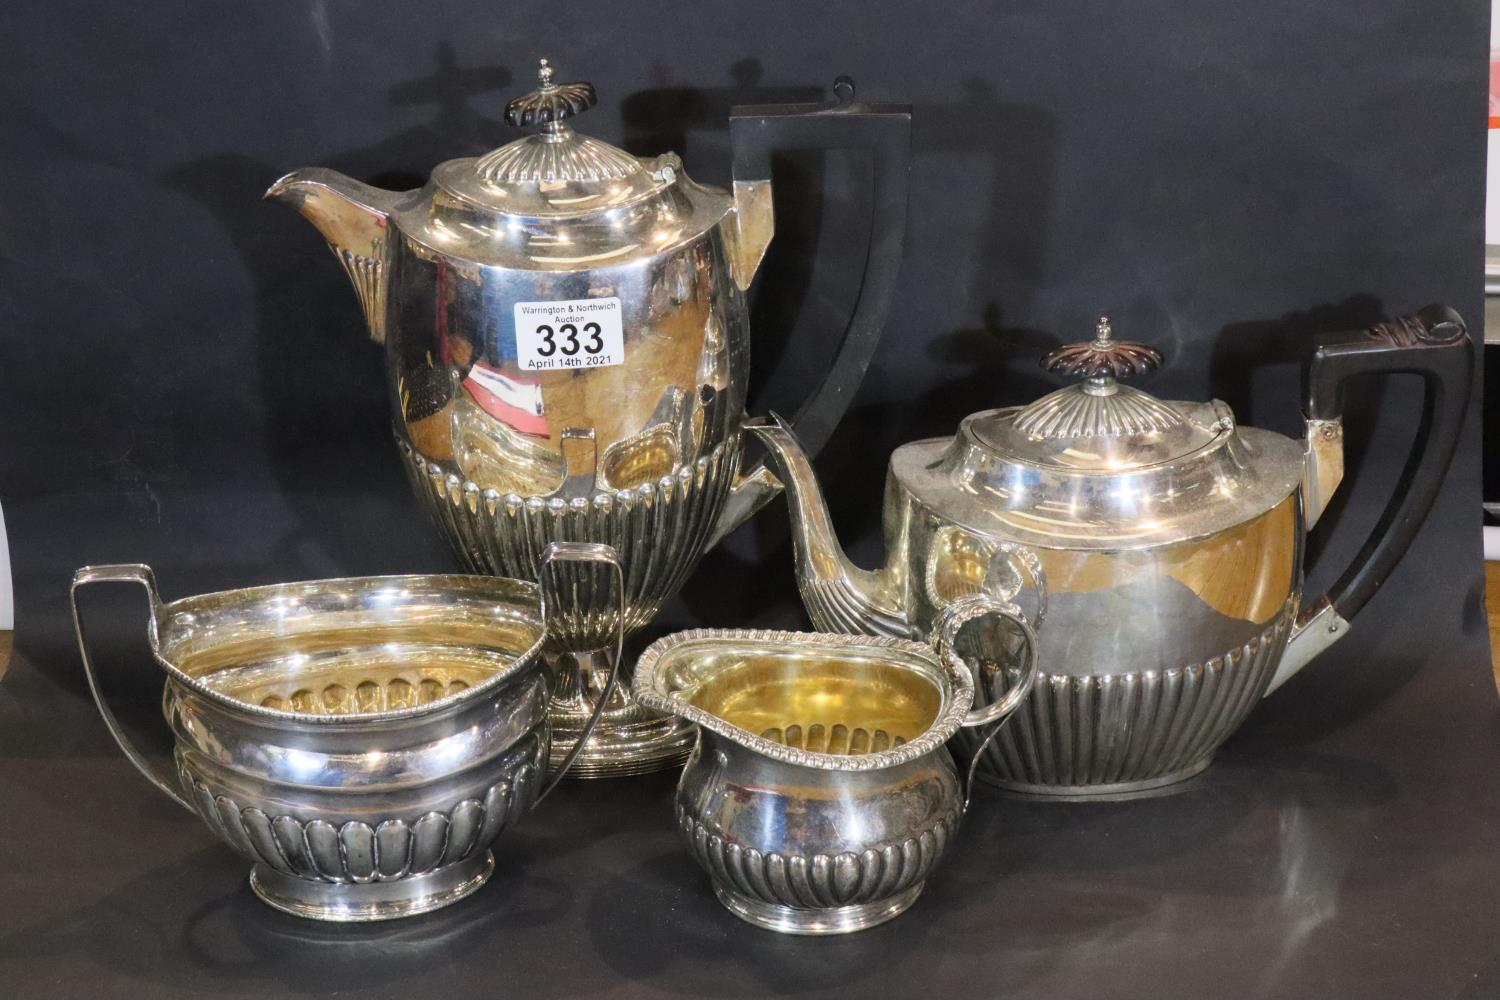 Matched silver plated four piece tea service including Walker and Hall. Not available for in-house